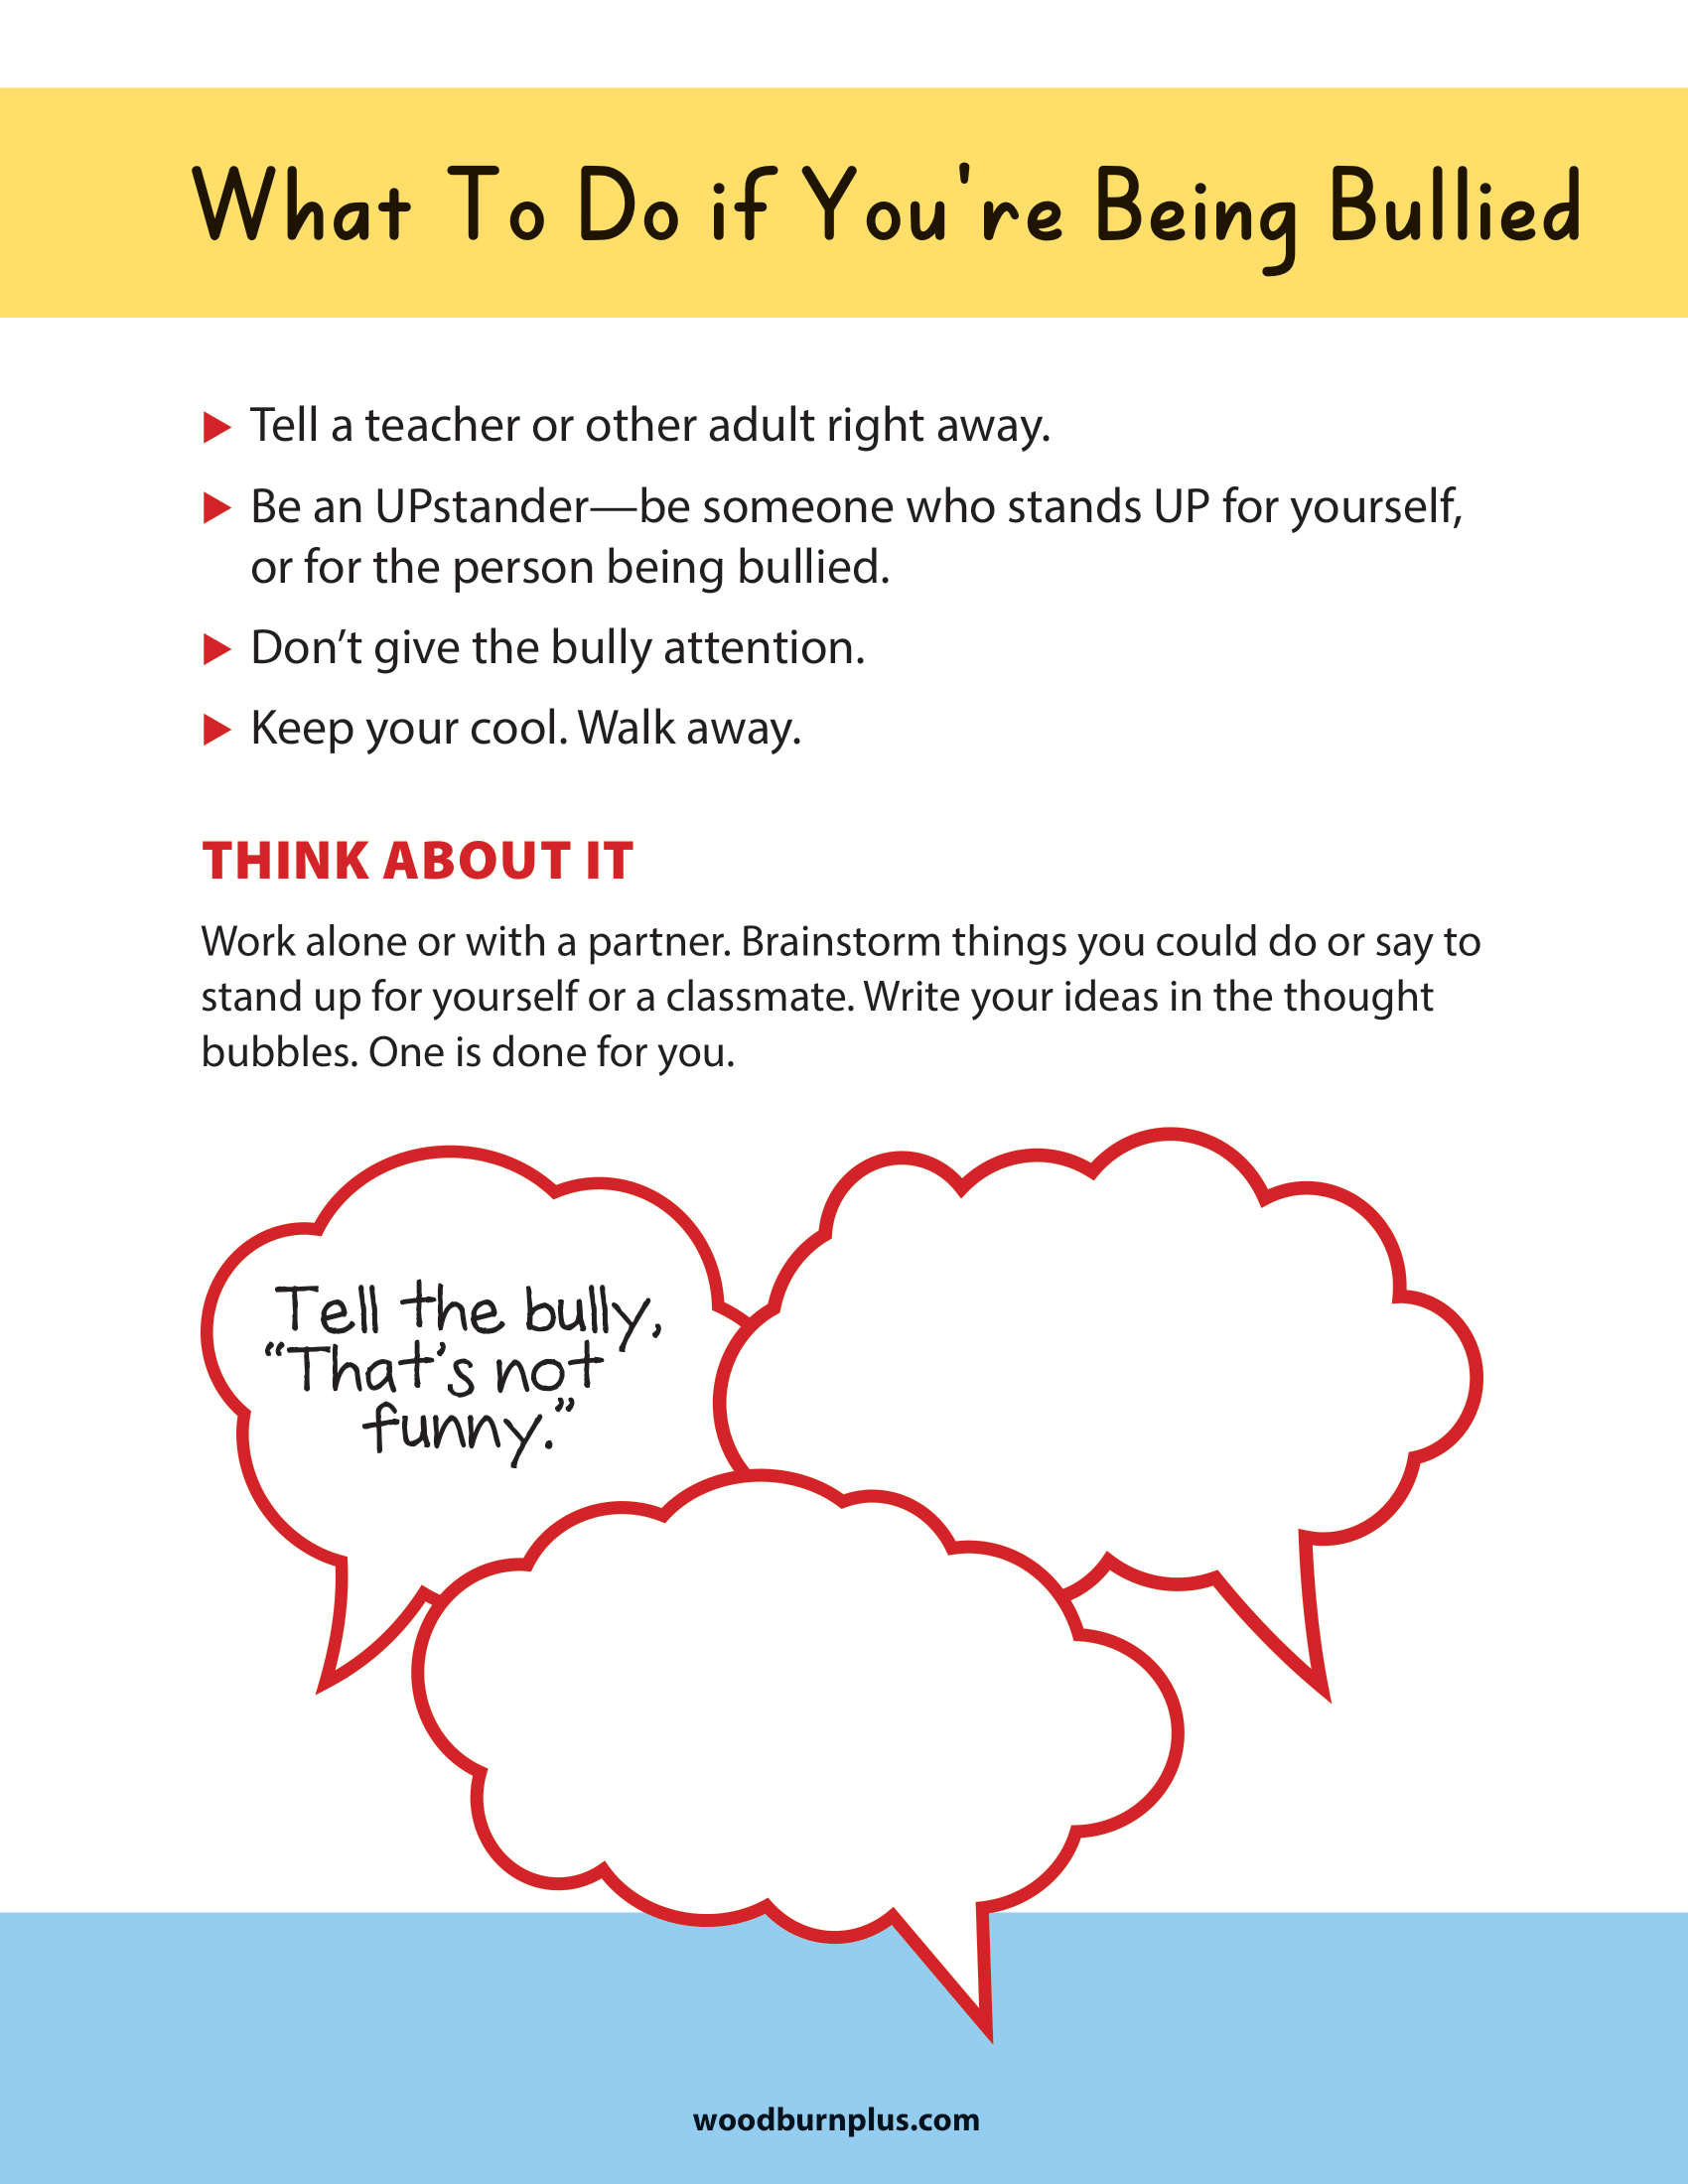 What to Do if You're Being Bullied